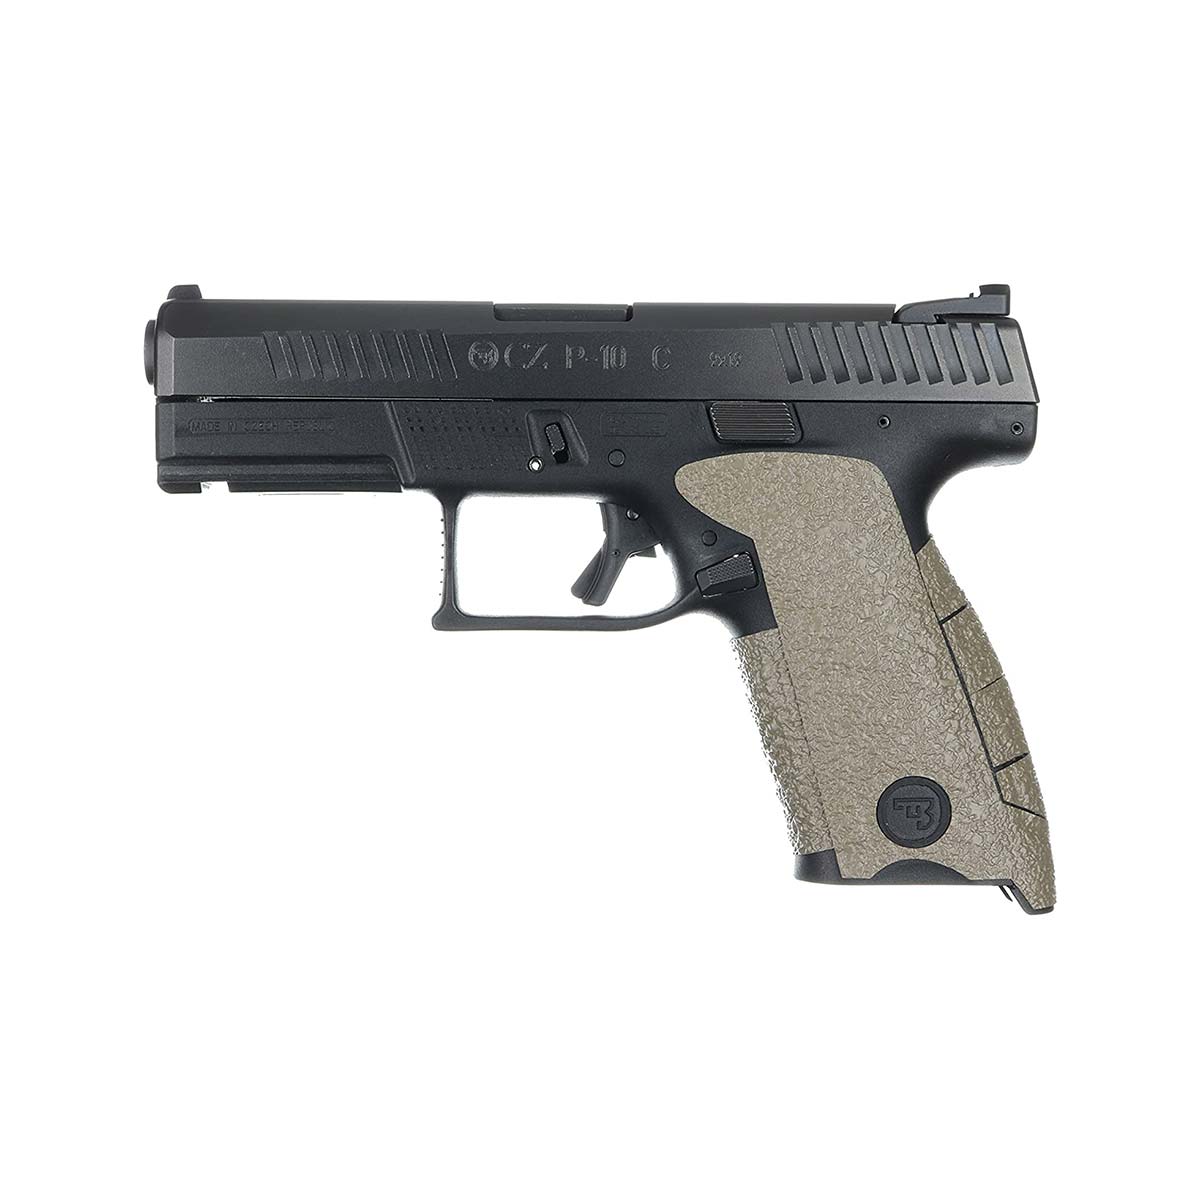 Grip Rubber sable CZ P10 compact 9mm small backstrap 